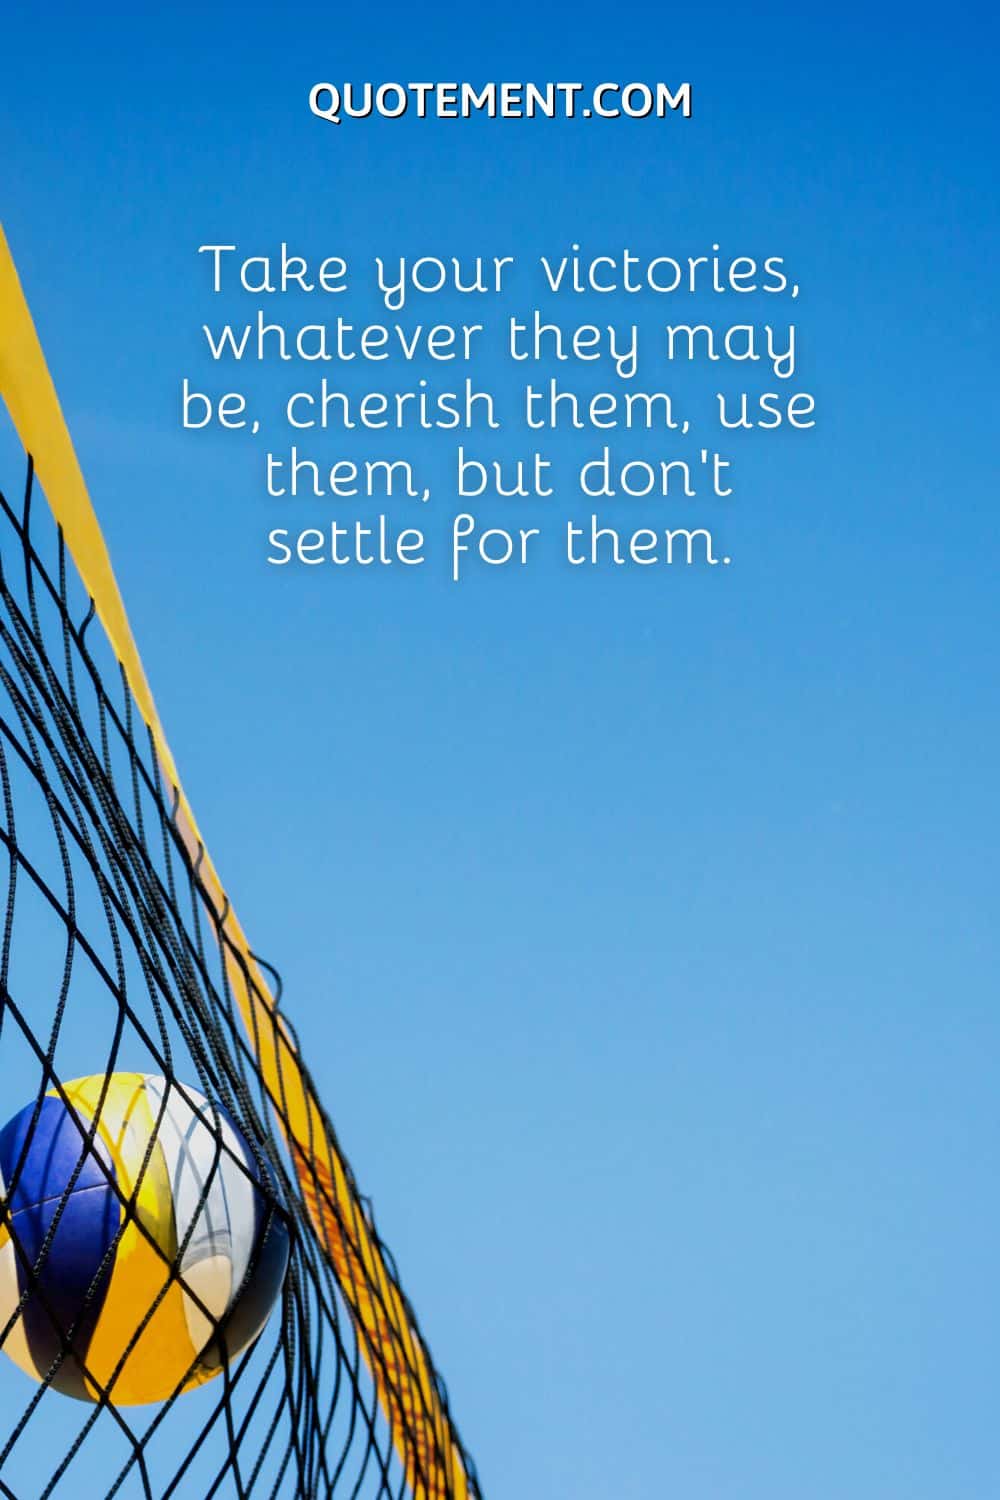 Take your victories, whatever they may be, cherish them, use them, but don’t settle for them.